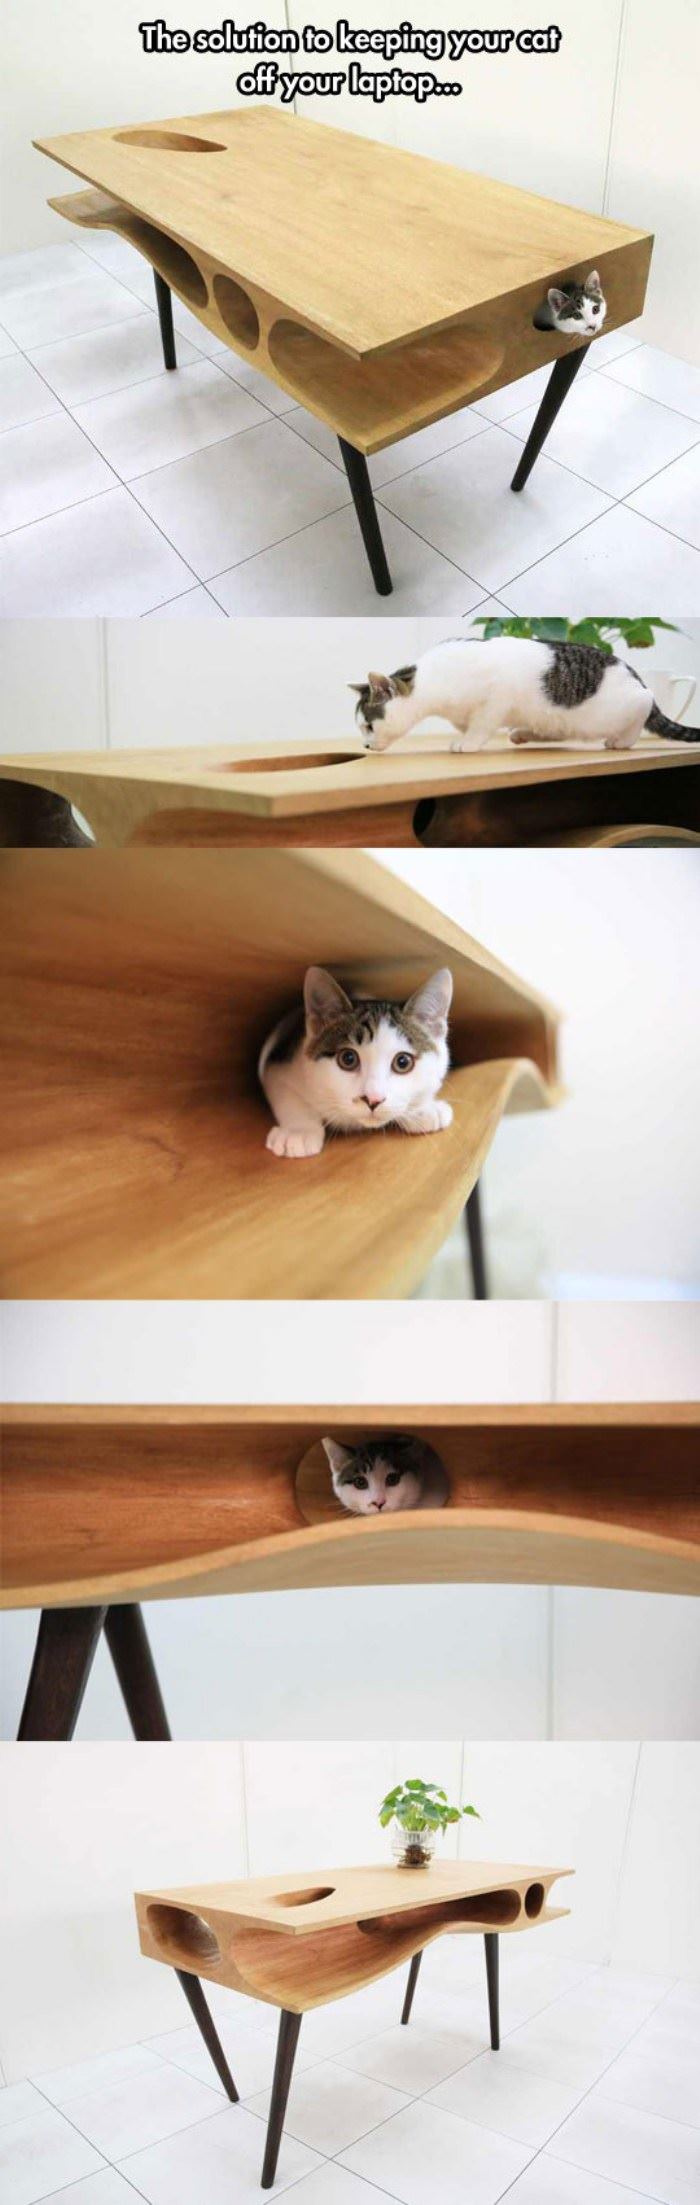 epic cat table funny picture